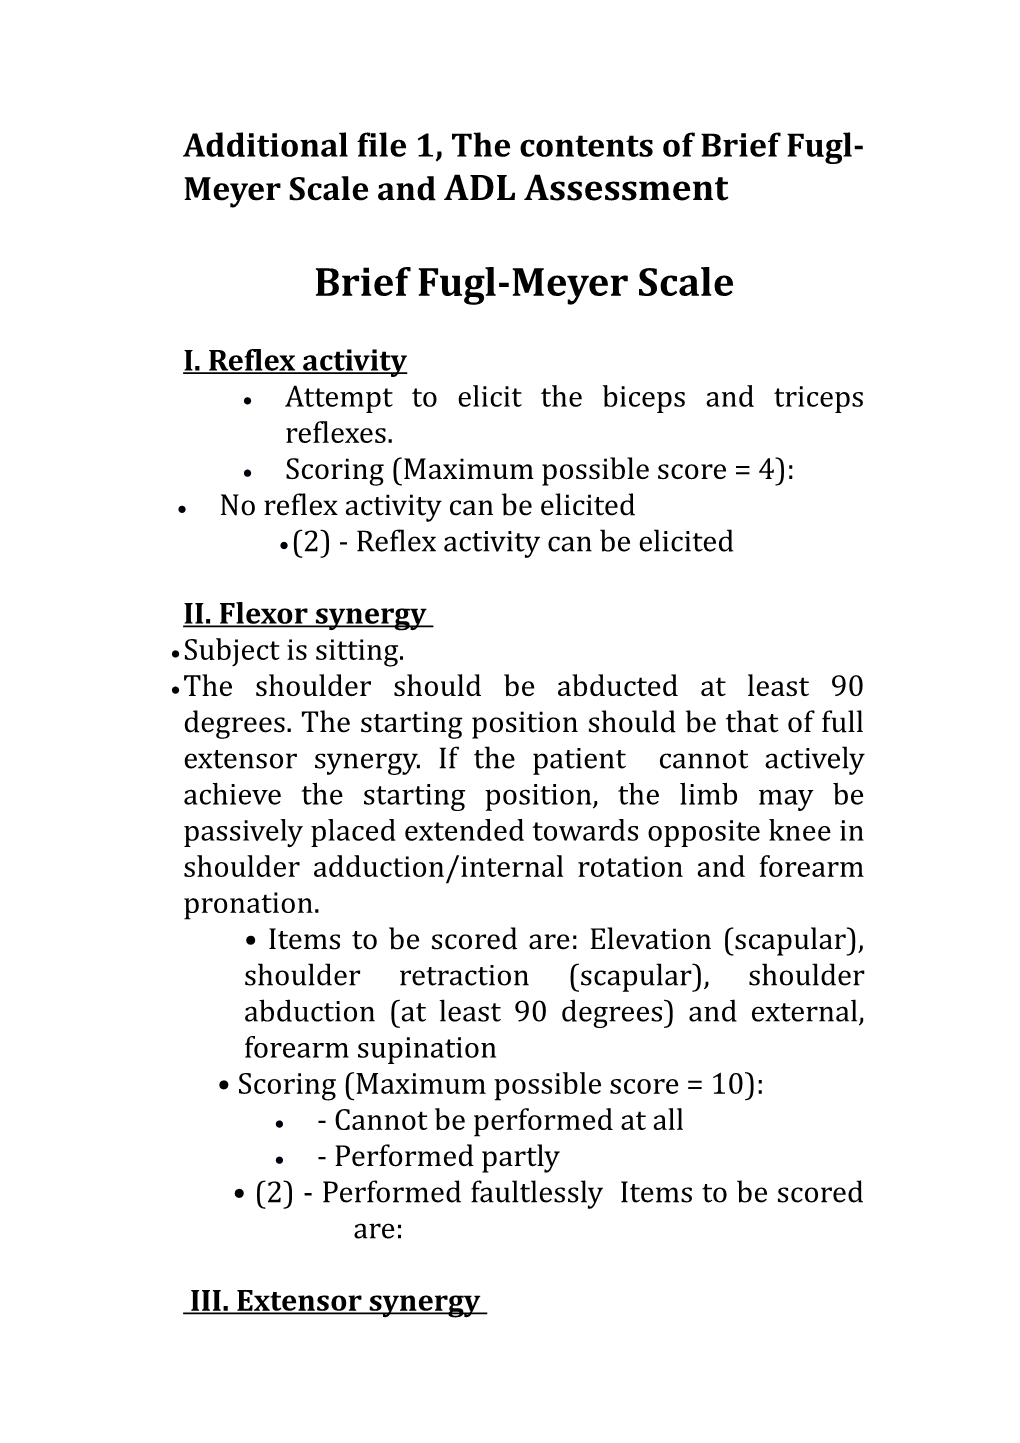 Additional File1, the Contents of Brief Fugl-Meyer Scale and ADL Assessment